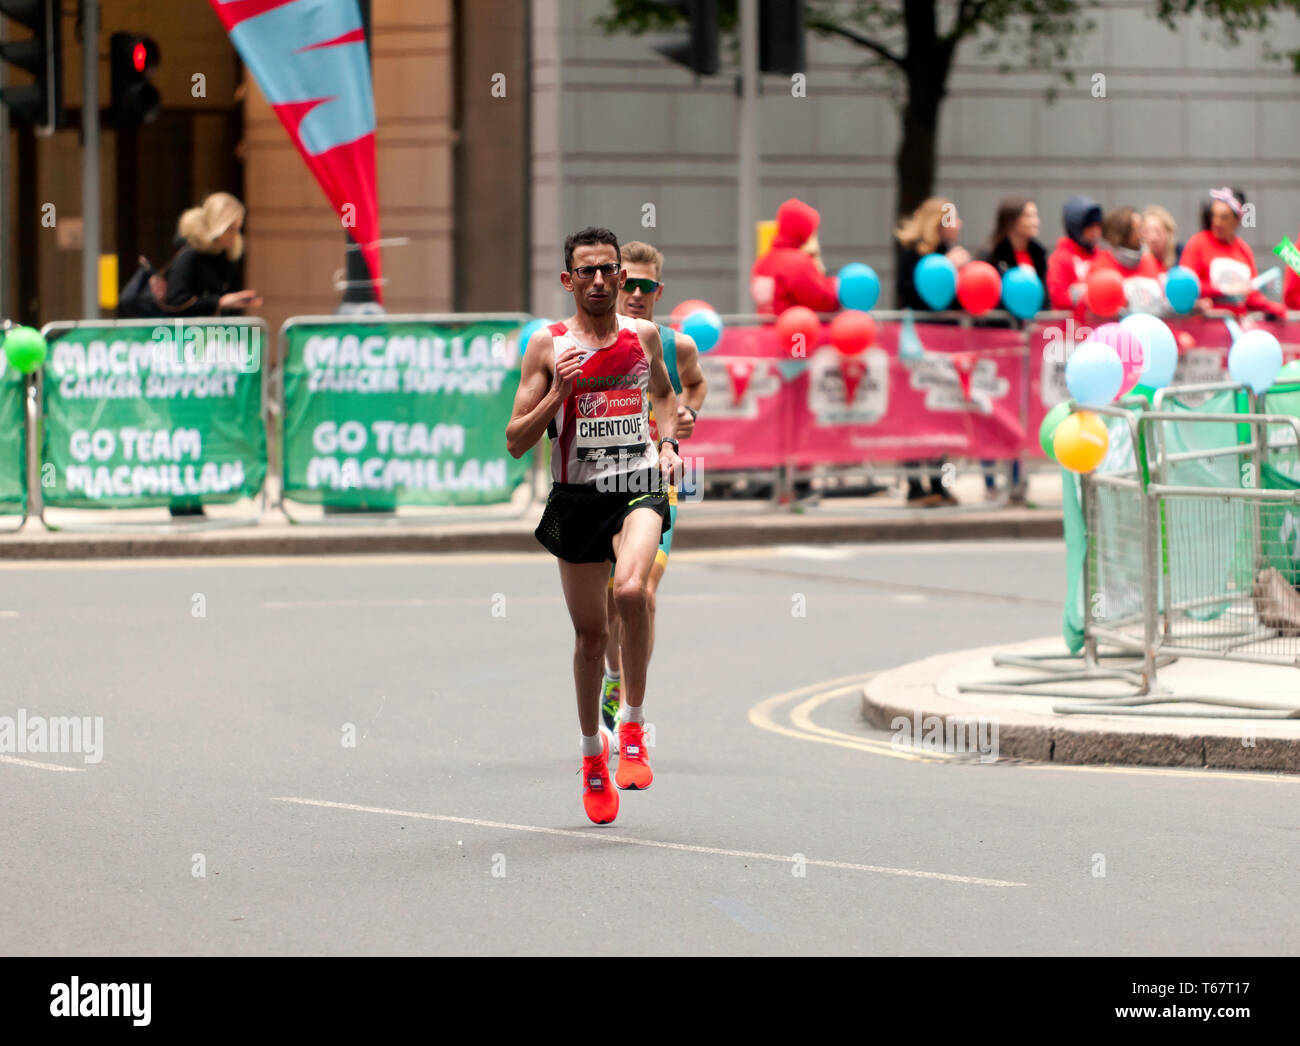 El Amin Chenttouf (MAR), and Michael Roeger (AUS), competing in the World Para 2019 London Marathon. El Amin won the race in a time of 02:21:23. Michael came second in 02:22:51. They both came first in their respective categories. Stock Photo